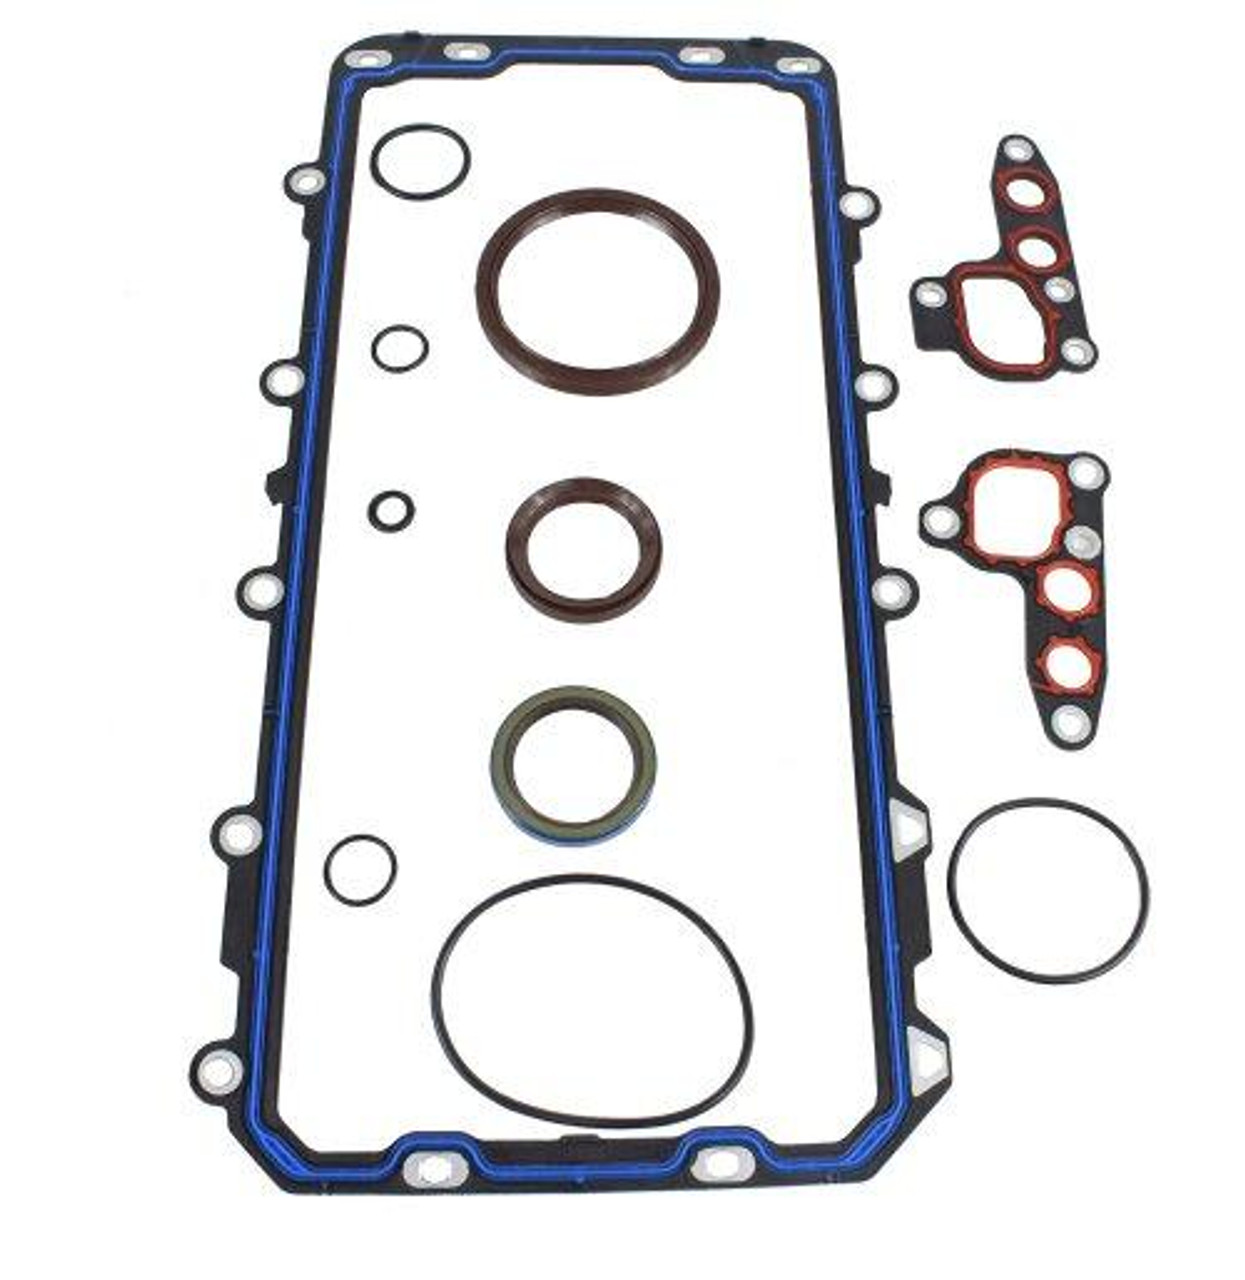 Lower Gasket Set - 2001 Ford Mustang 4.6L Engine Parts # LGS4150ZE257